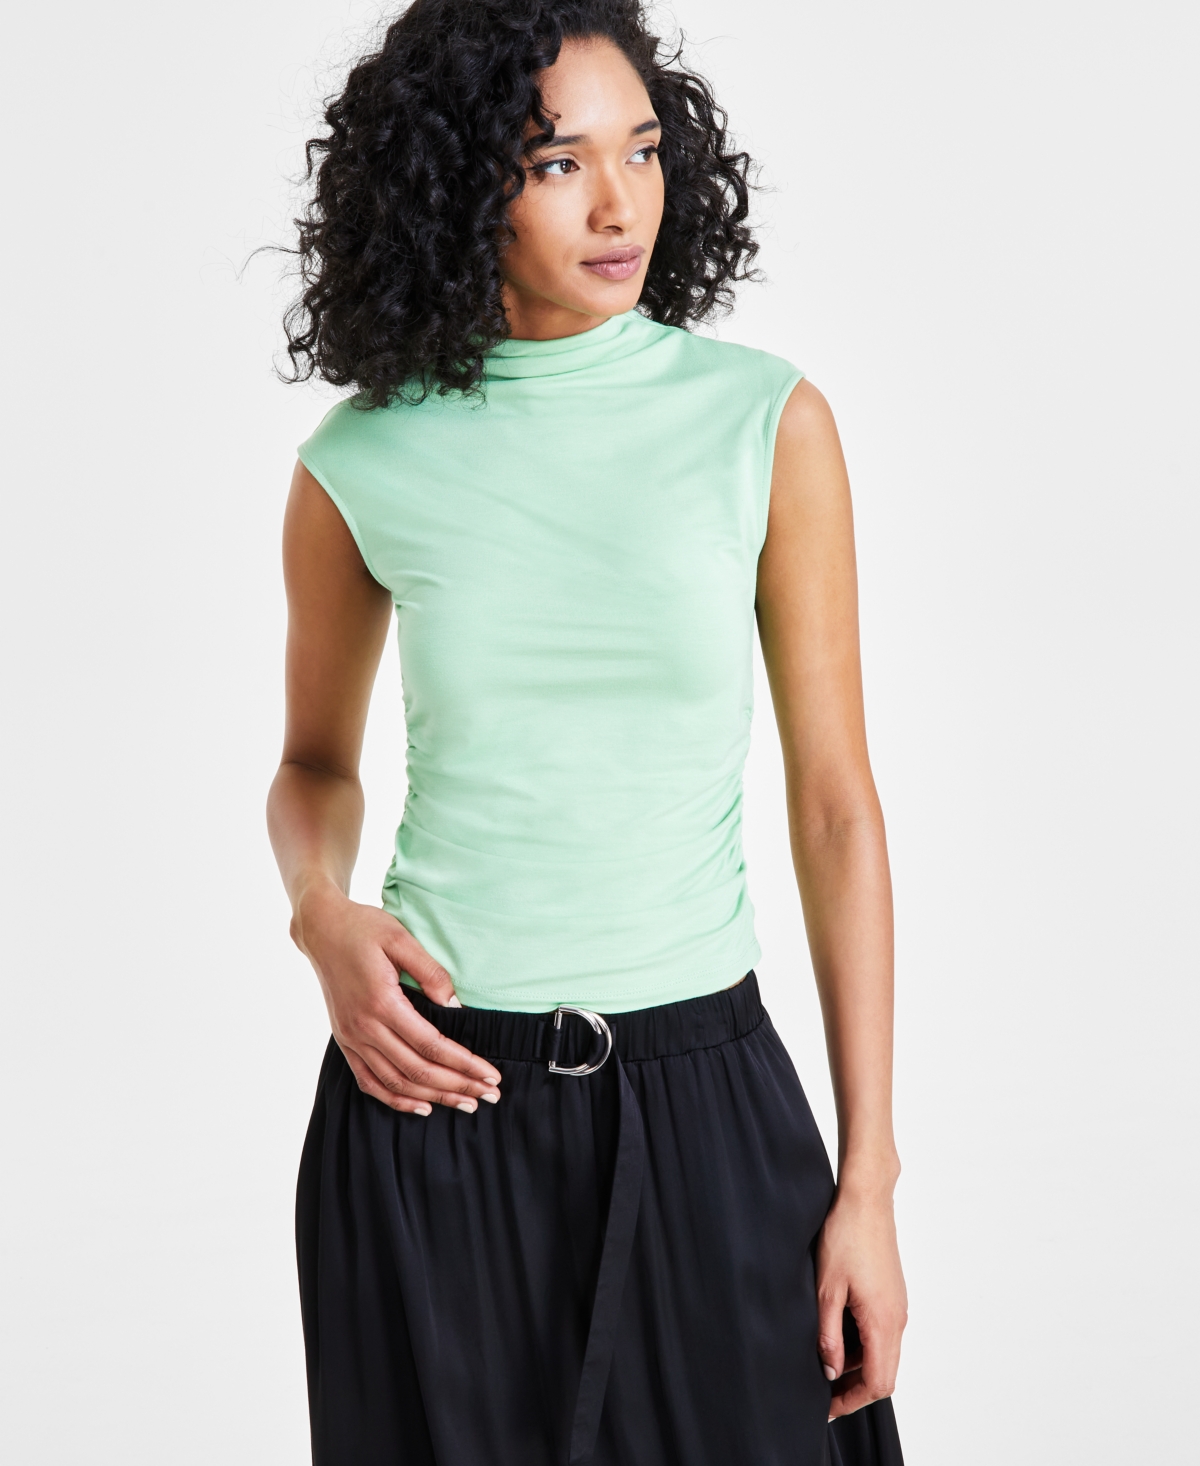 Women's Sleeveless Mock-Neck Cropped Top, Created for Macy's - Soft Pistachio